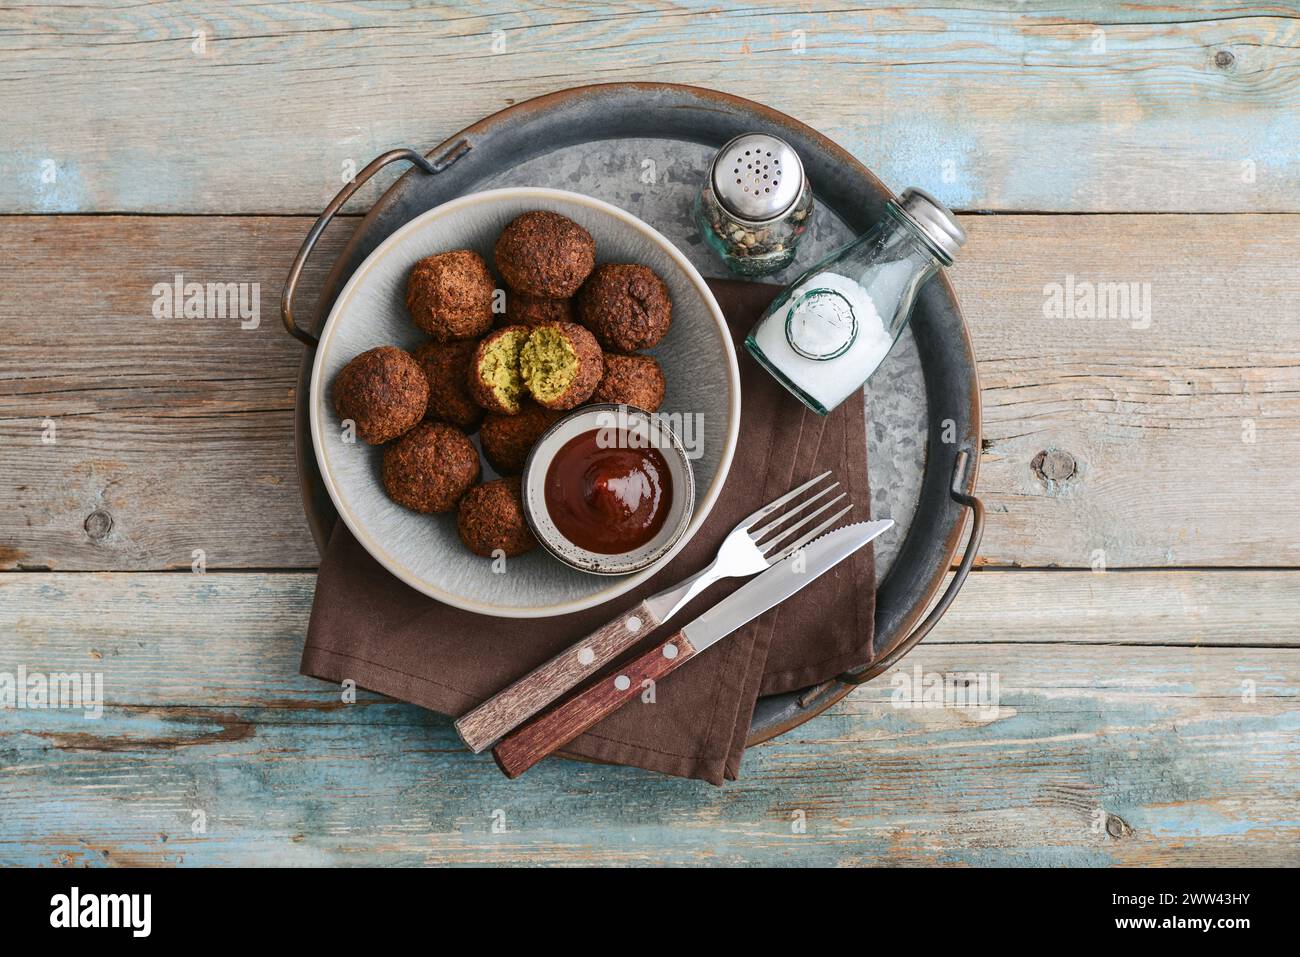 Falafel plate with spice and souce on metal tray on wooden background, top view Stock Photo